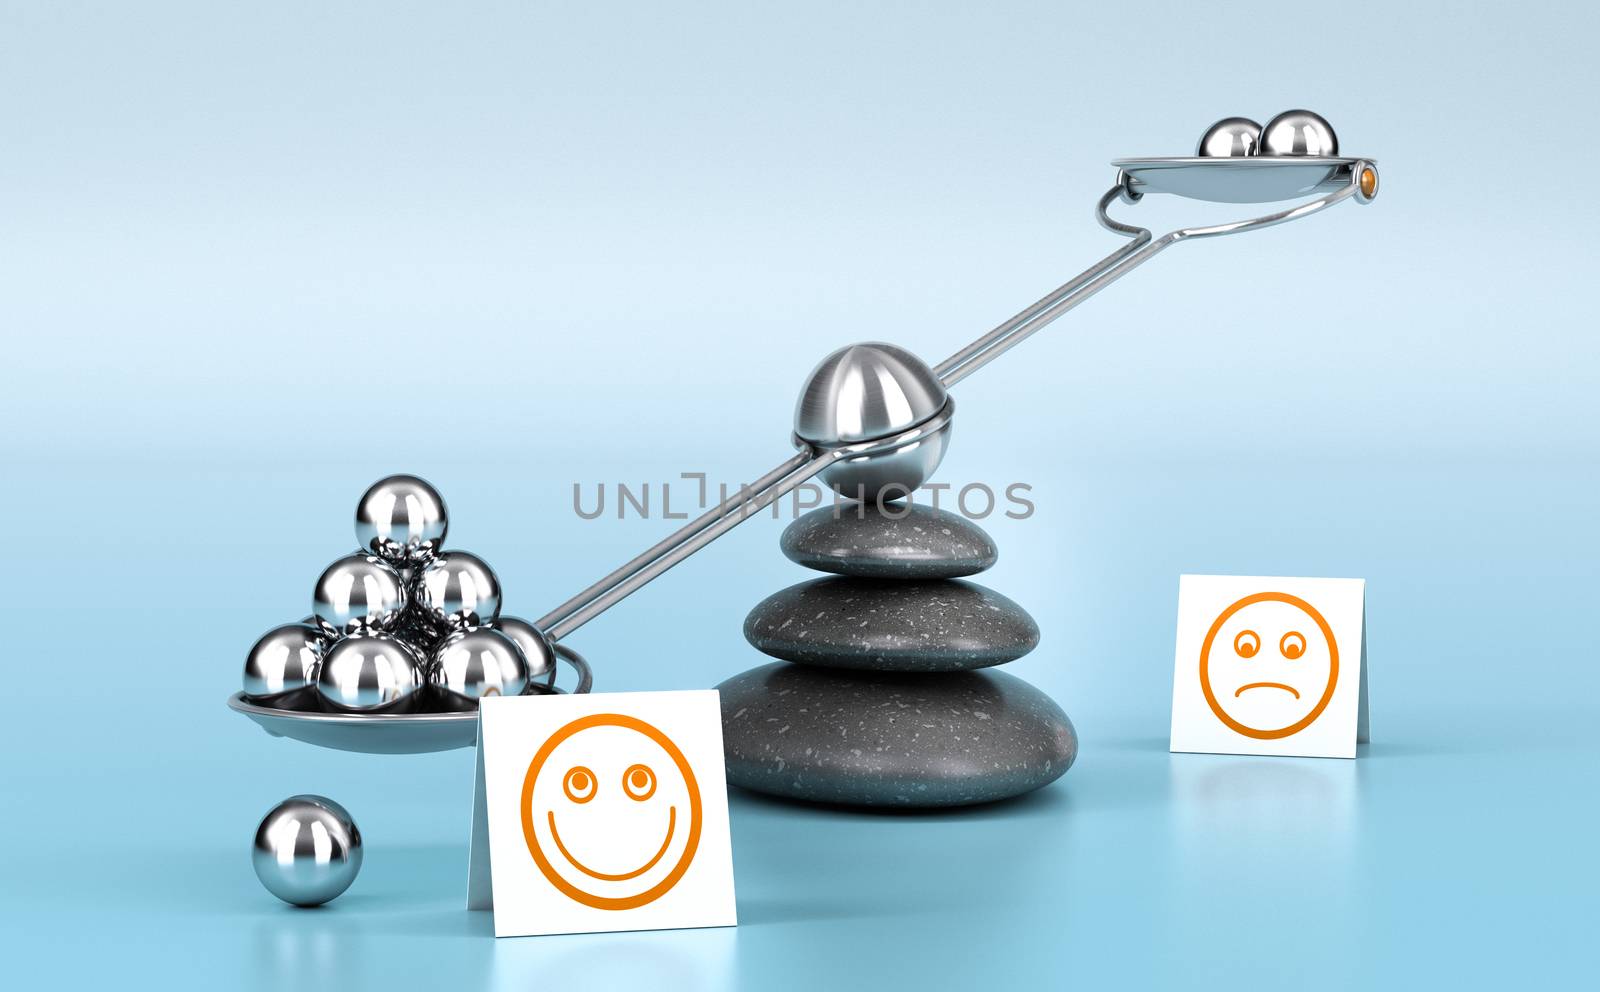 Metallic spheres on a seesaw with three black pebbles over blue background. Concept image for illustration of wellness or happyness.